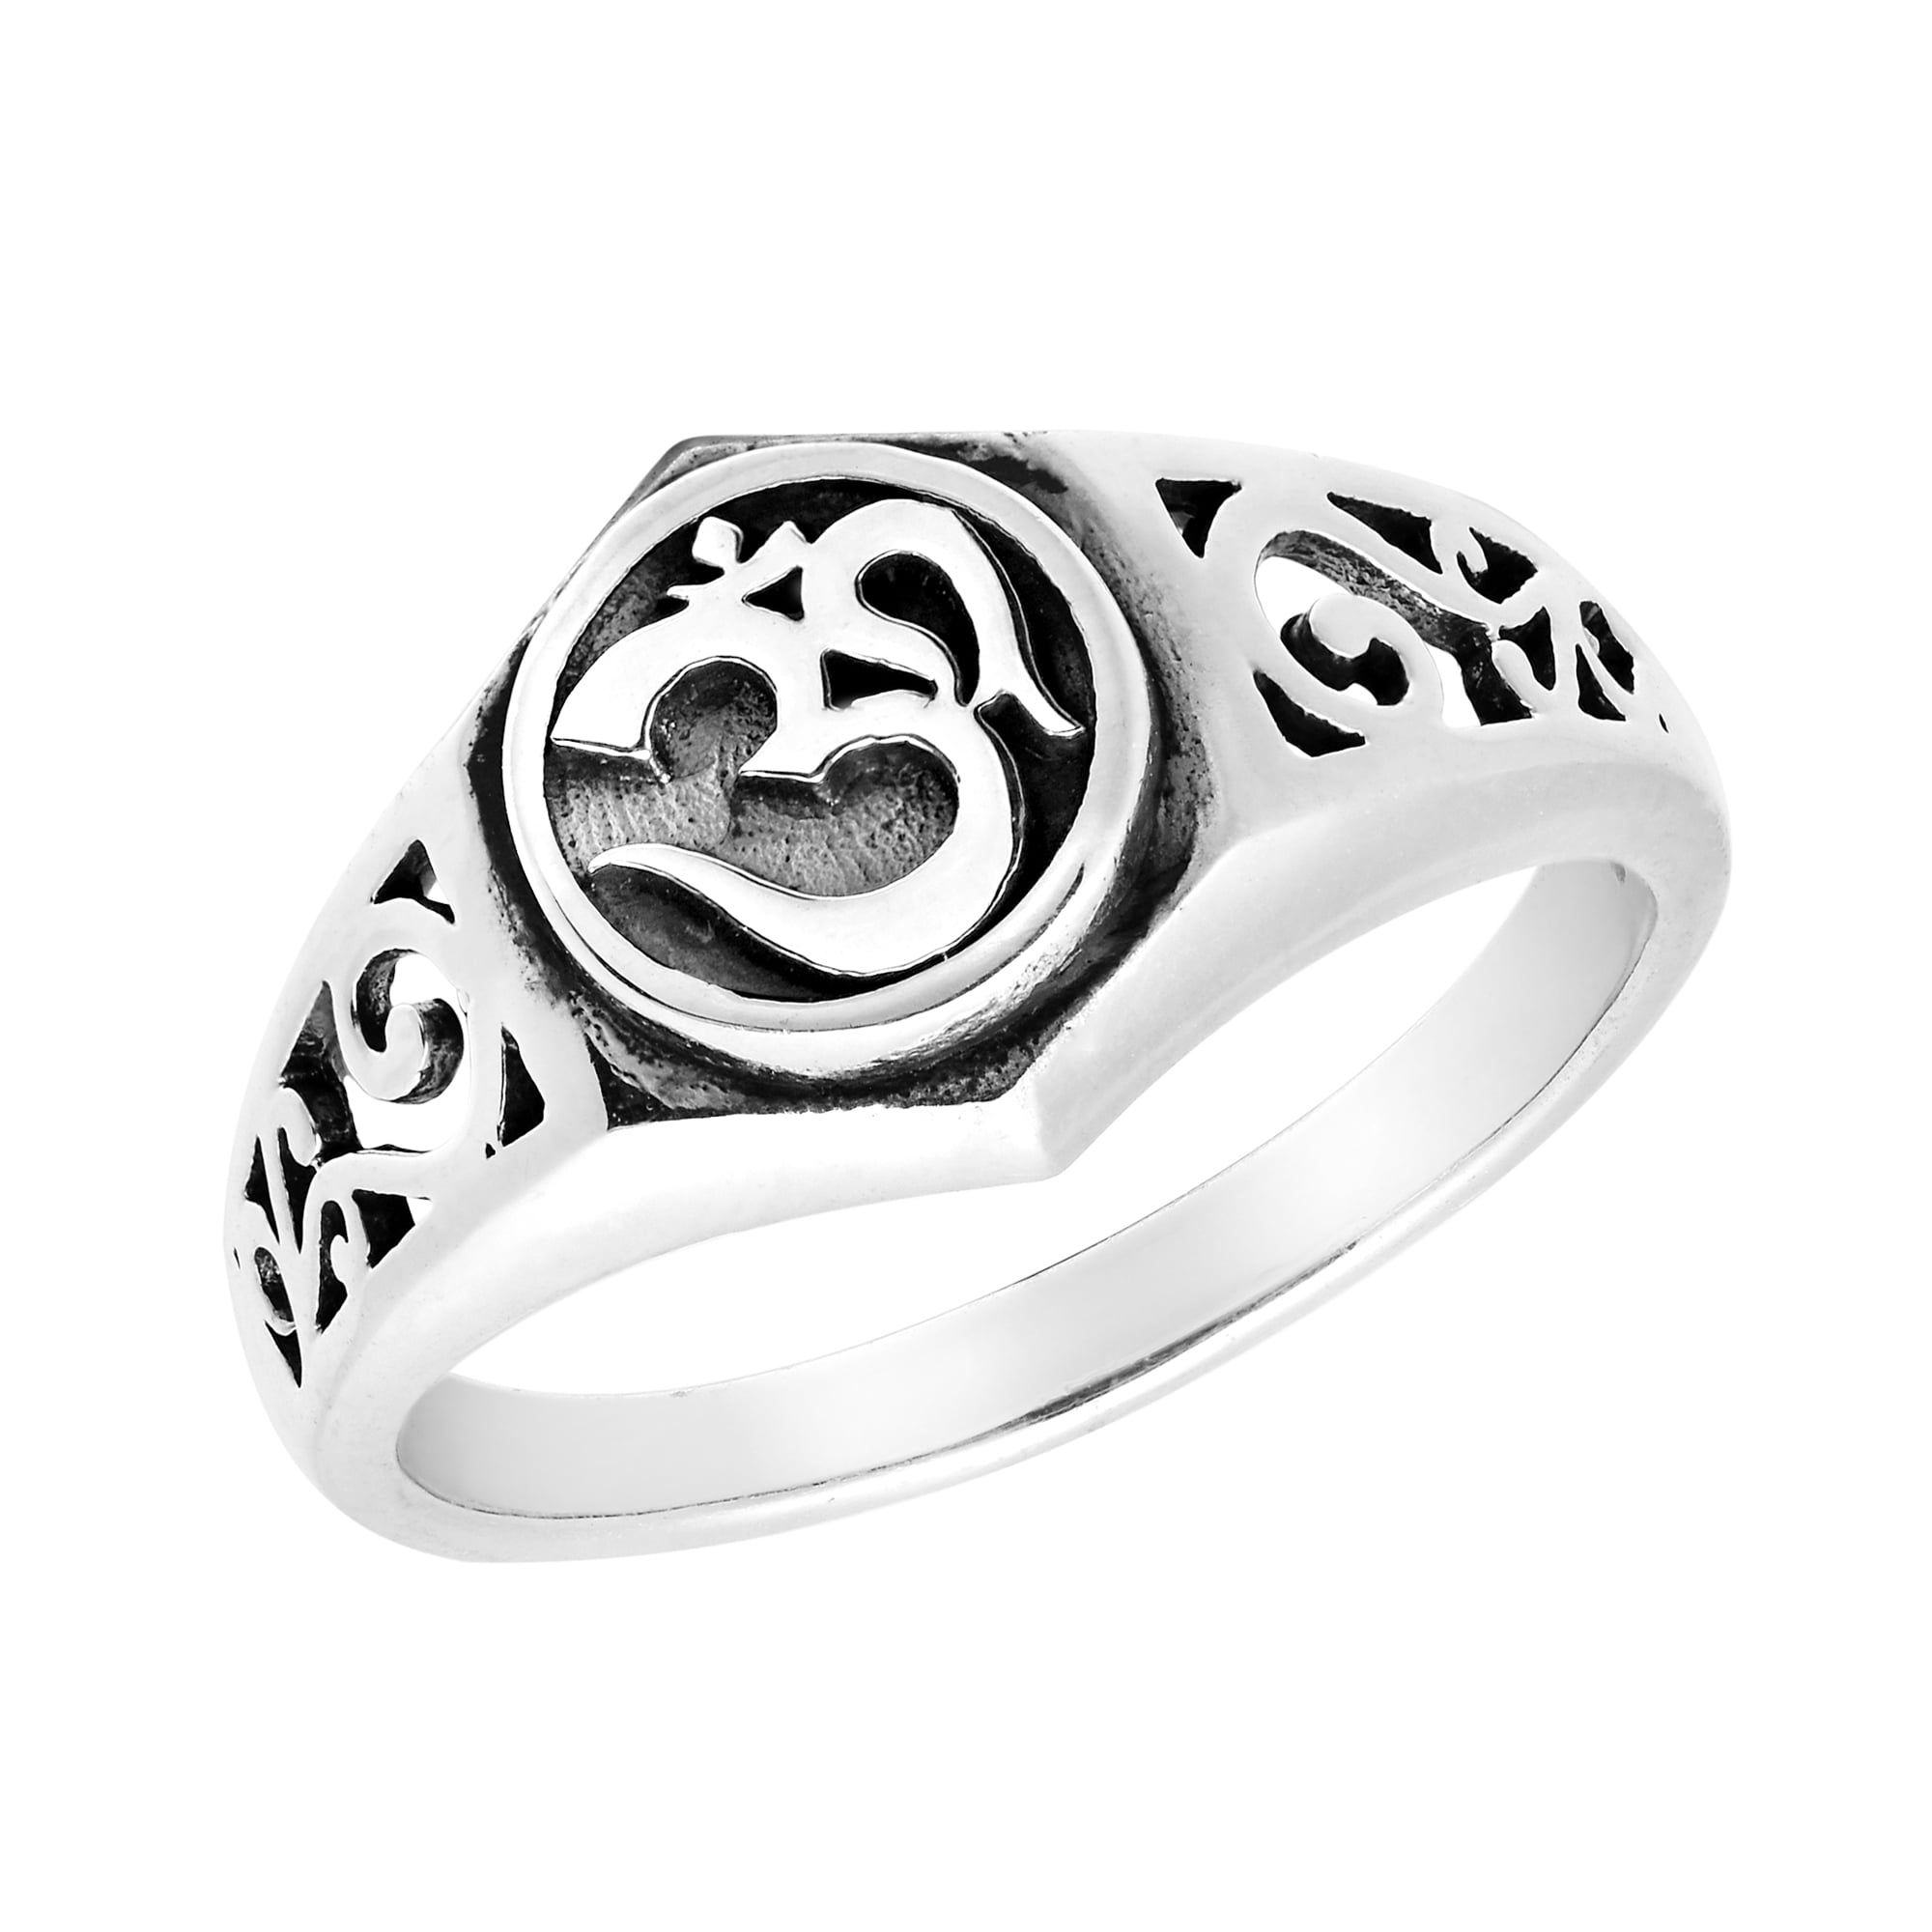 Lotus and Om Ring Adjustable | Silver rings, Silver engagement rings, Silver  jewelry rings